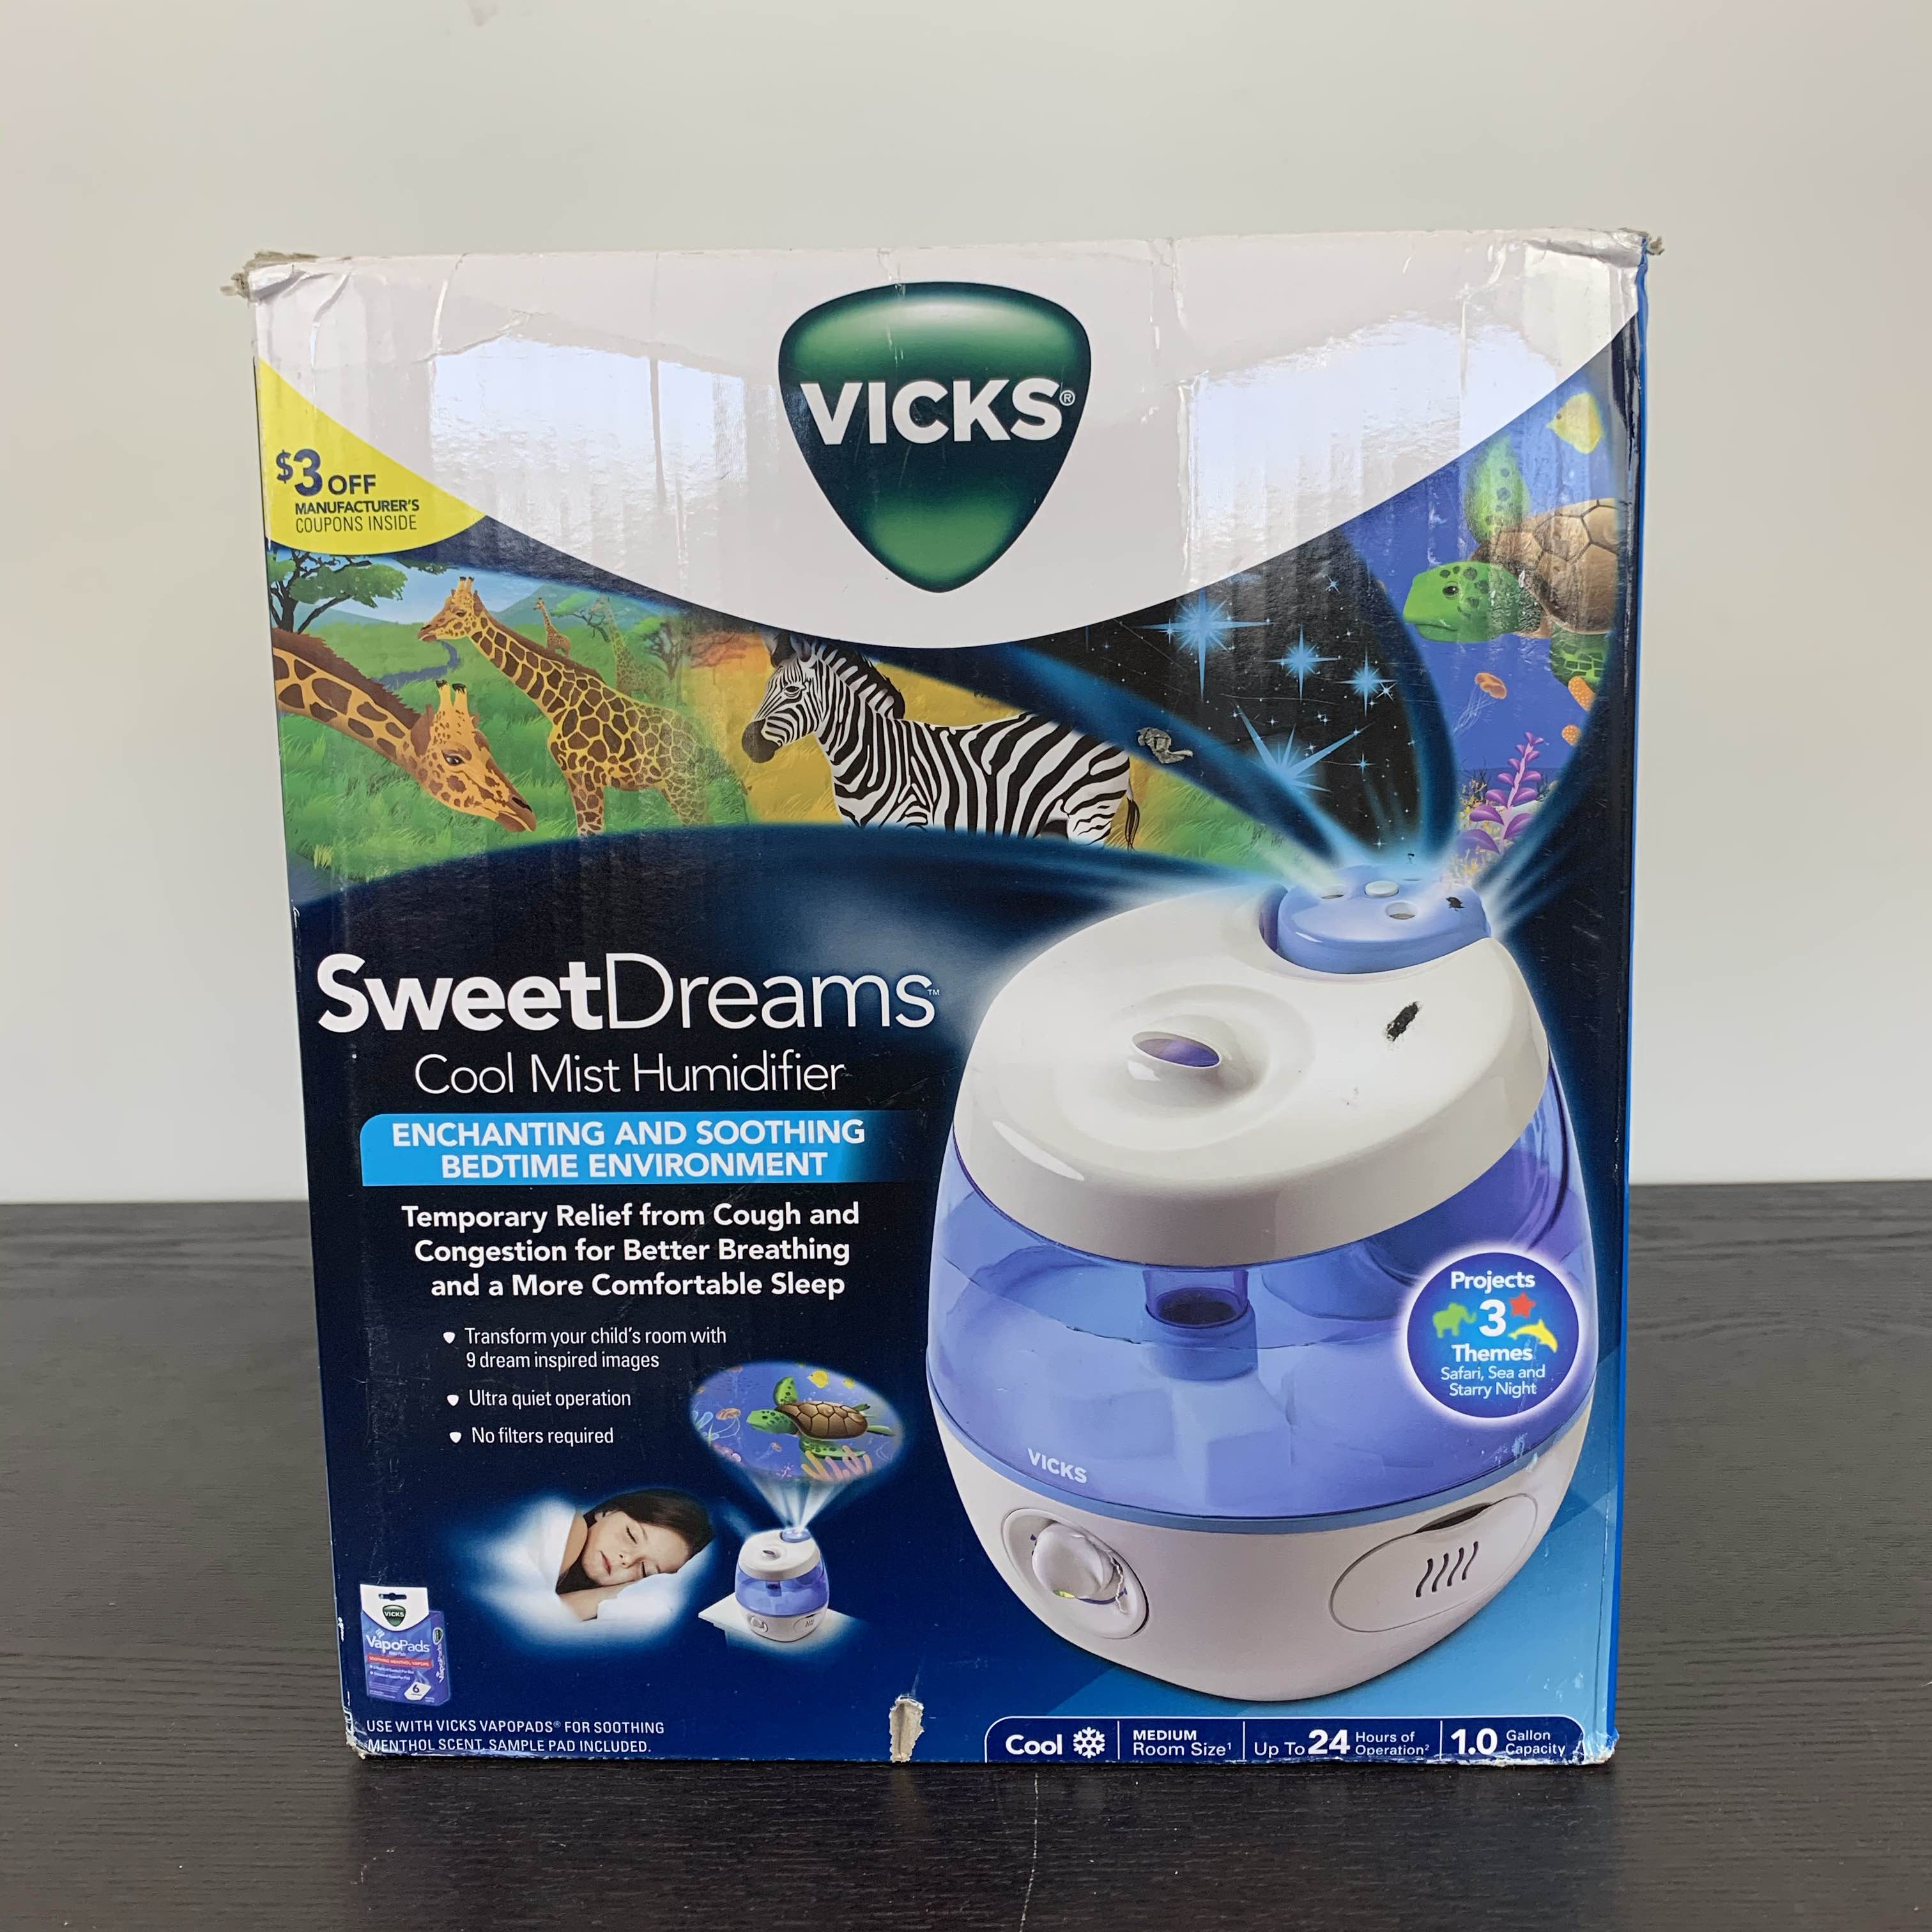 Vicks Sweet Dreams Cool Mist Humidifier VUL575 - Getting Started 